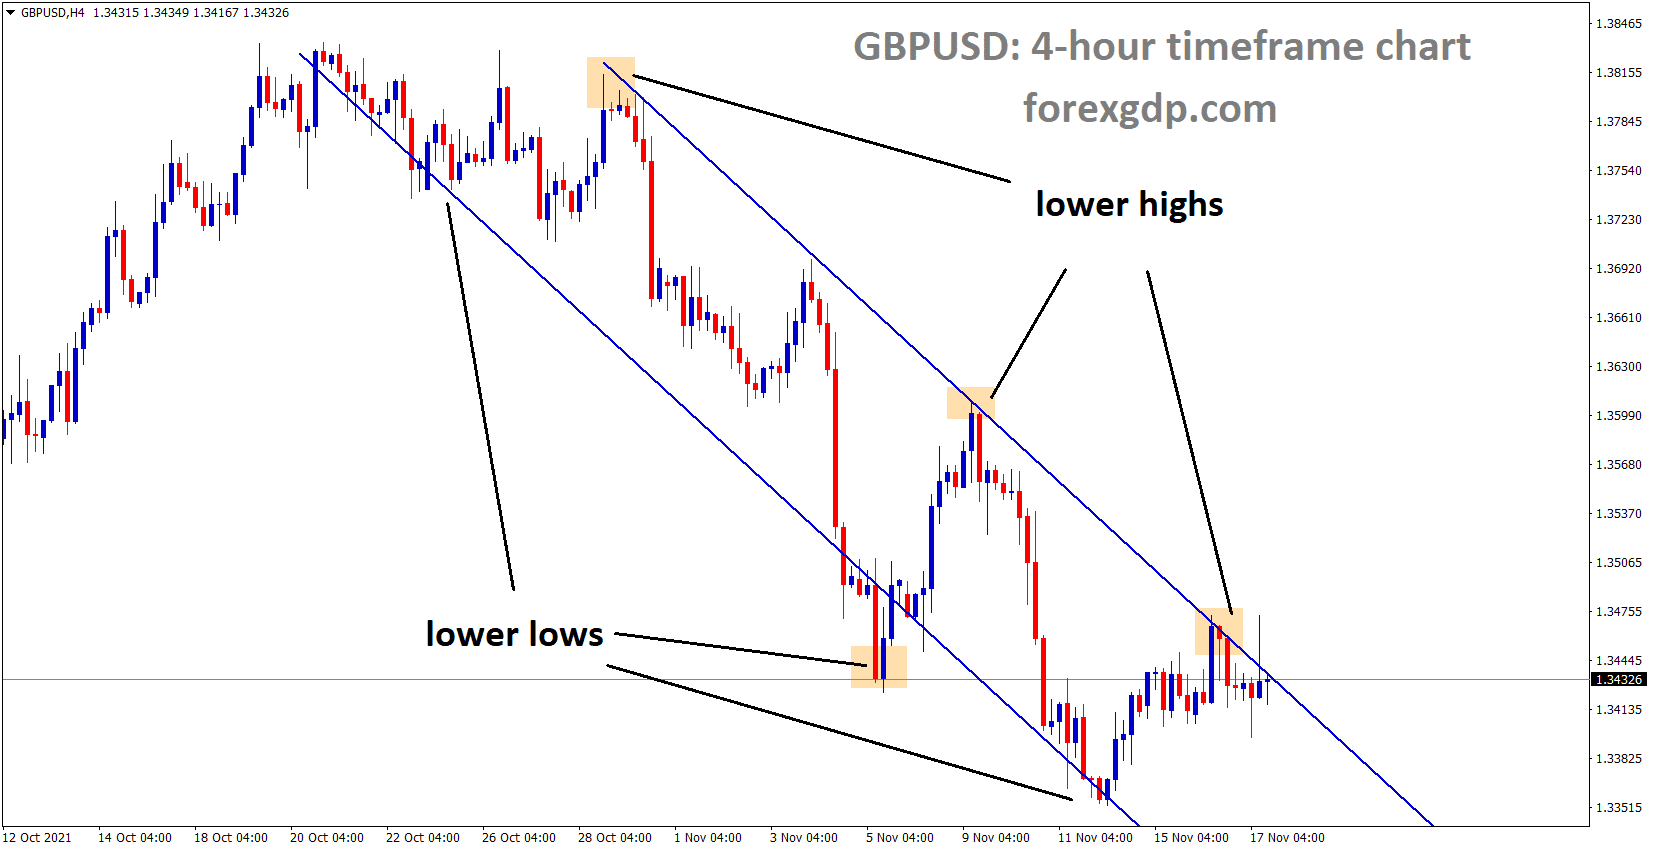 GBPUSD is moving in the Descending channel and market consolidated at the Lower high area of the channel